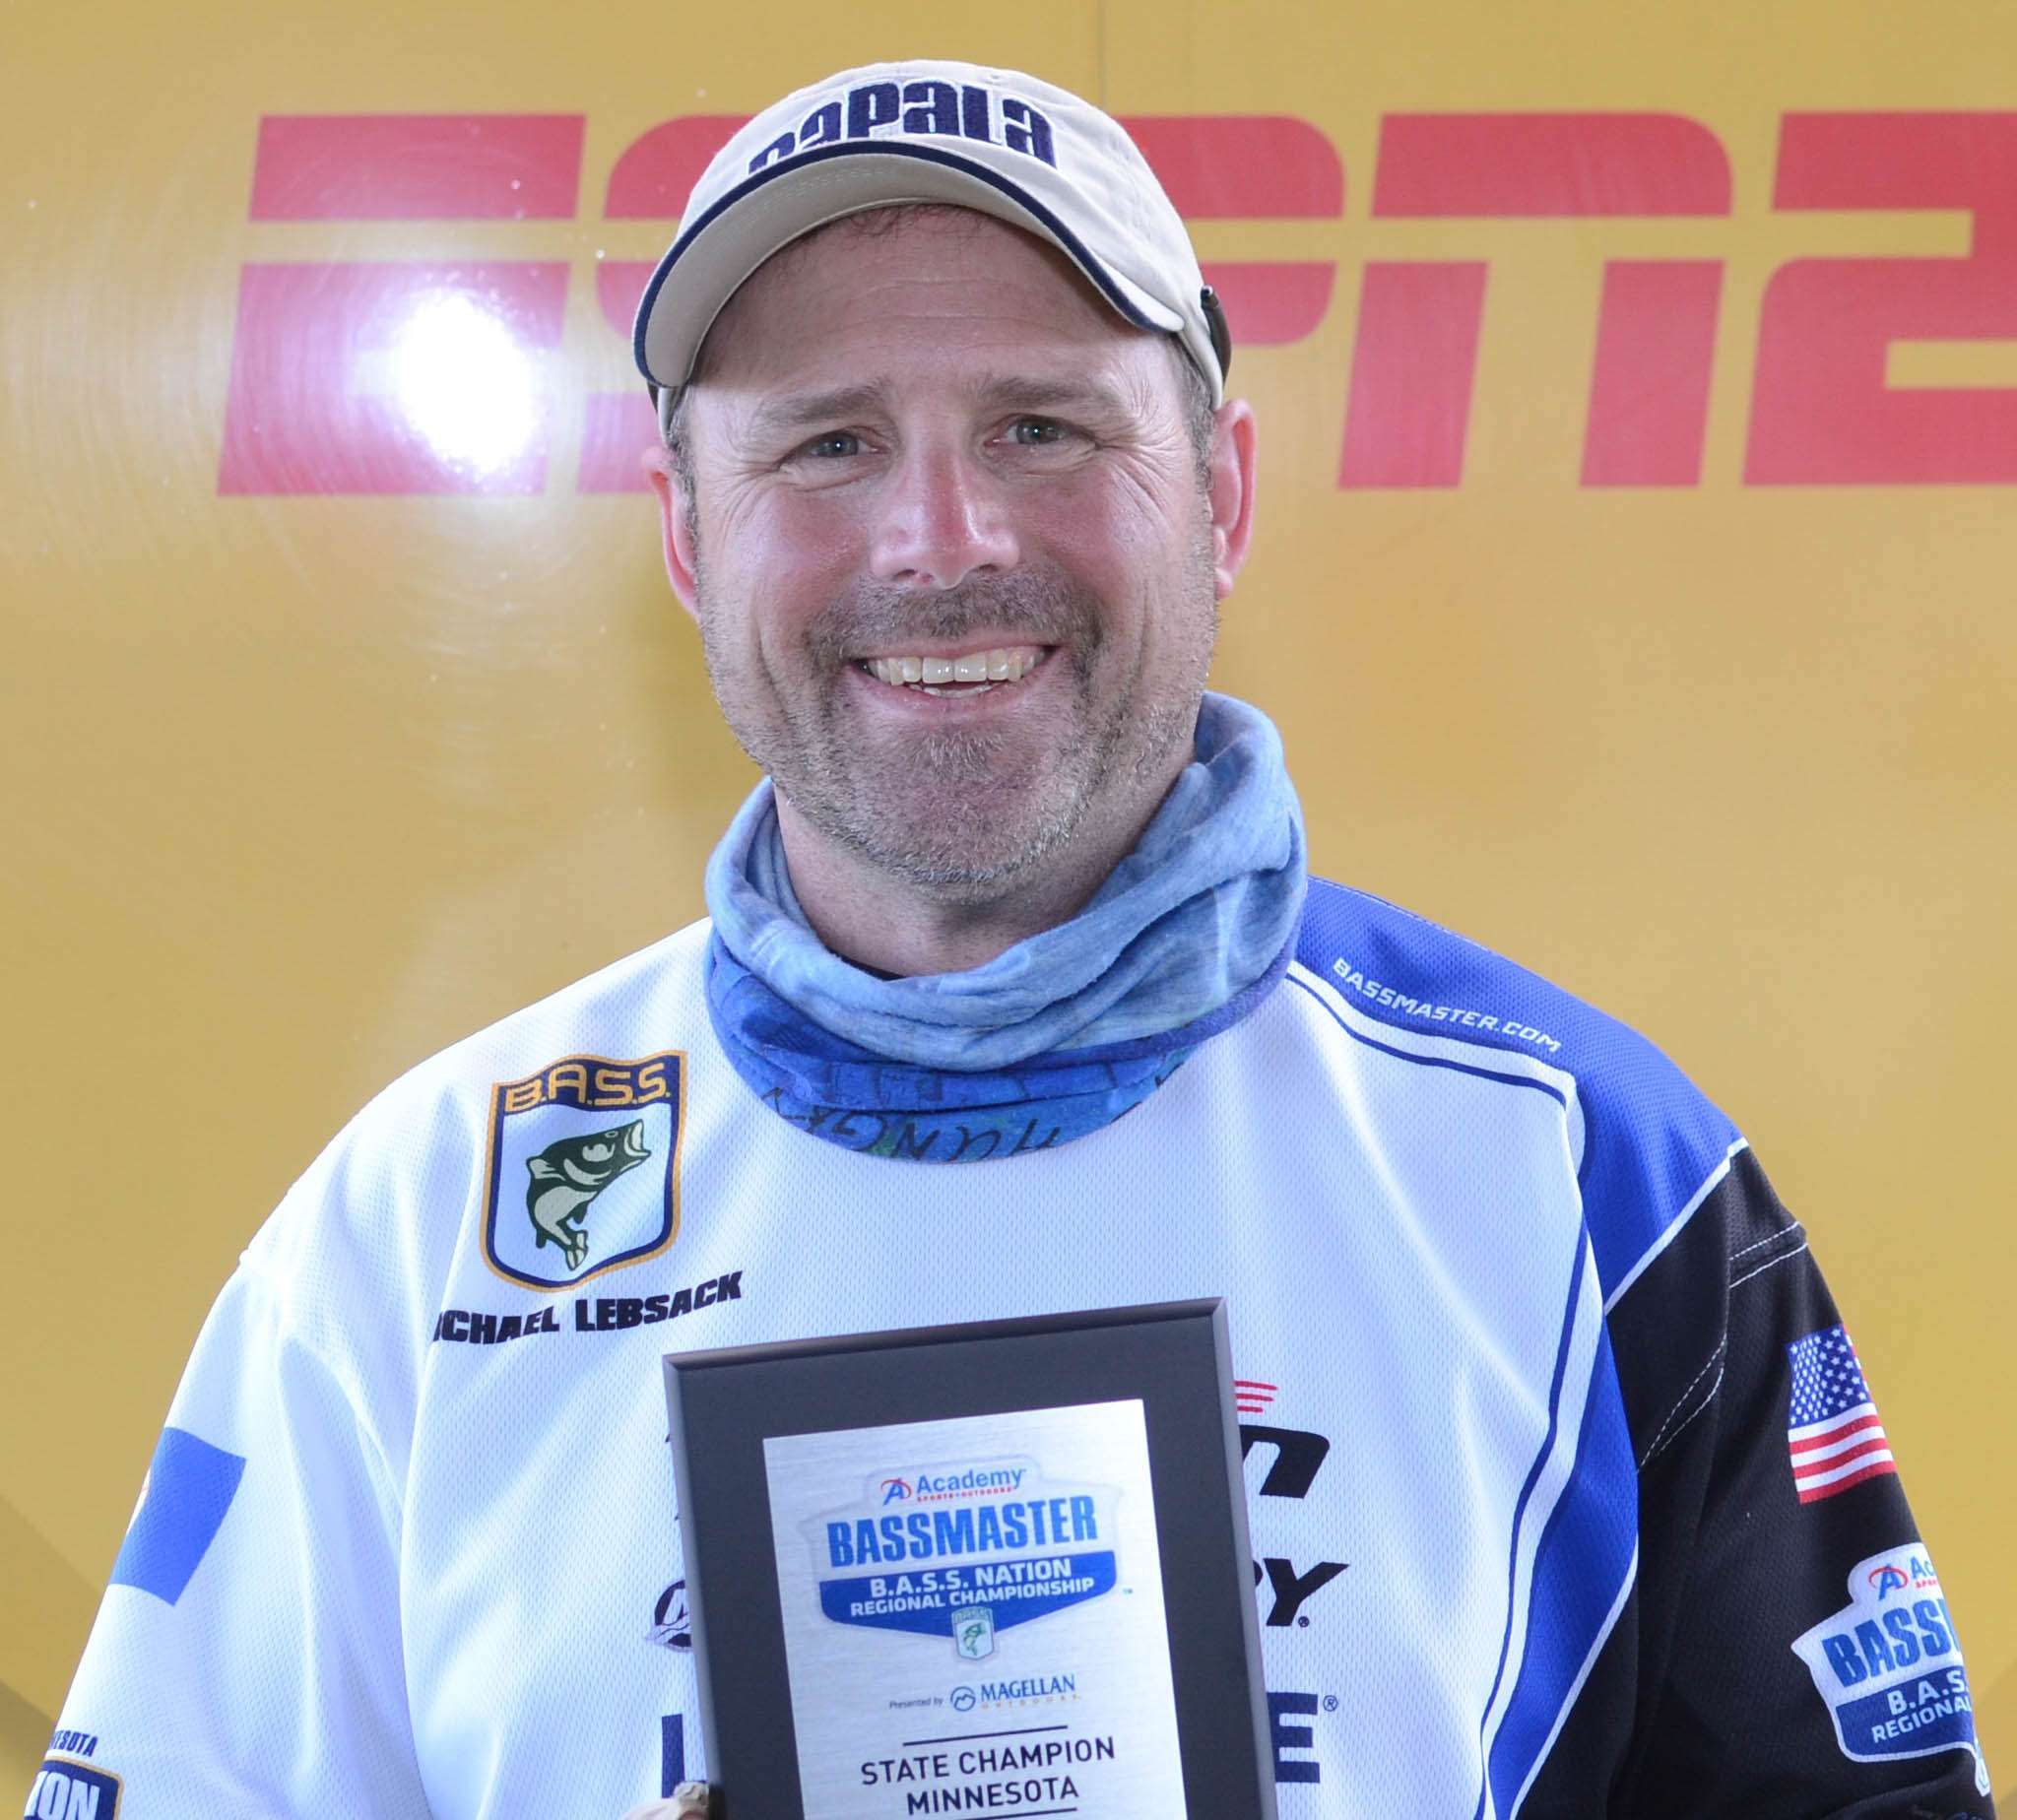 Michael Lebsack <br>
Minnesota Nonboater <br>
Michael Lebsack hails from the Duluth Bass Club. He works as a general manager. Lebsack, who will be competing in his first championship, likes hunting waterfowl, coaching, hockey and working with the Boy Scouts. 